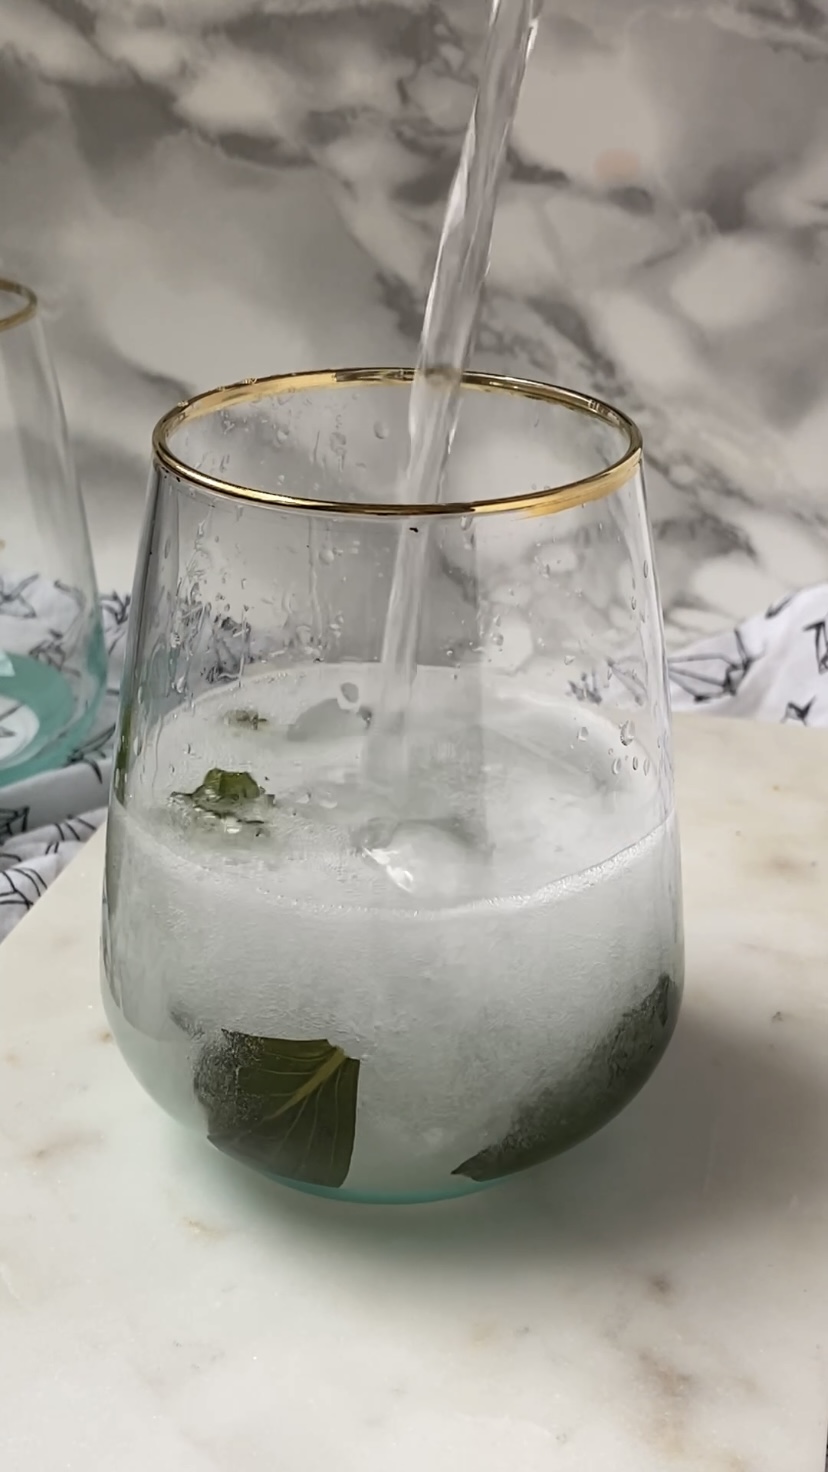 Adding sparkling water to a cocktail glass.